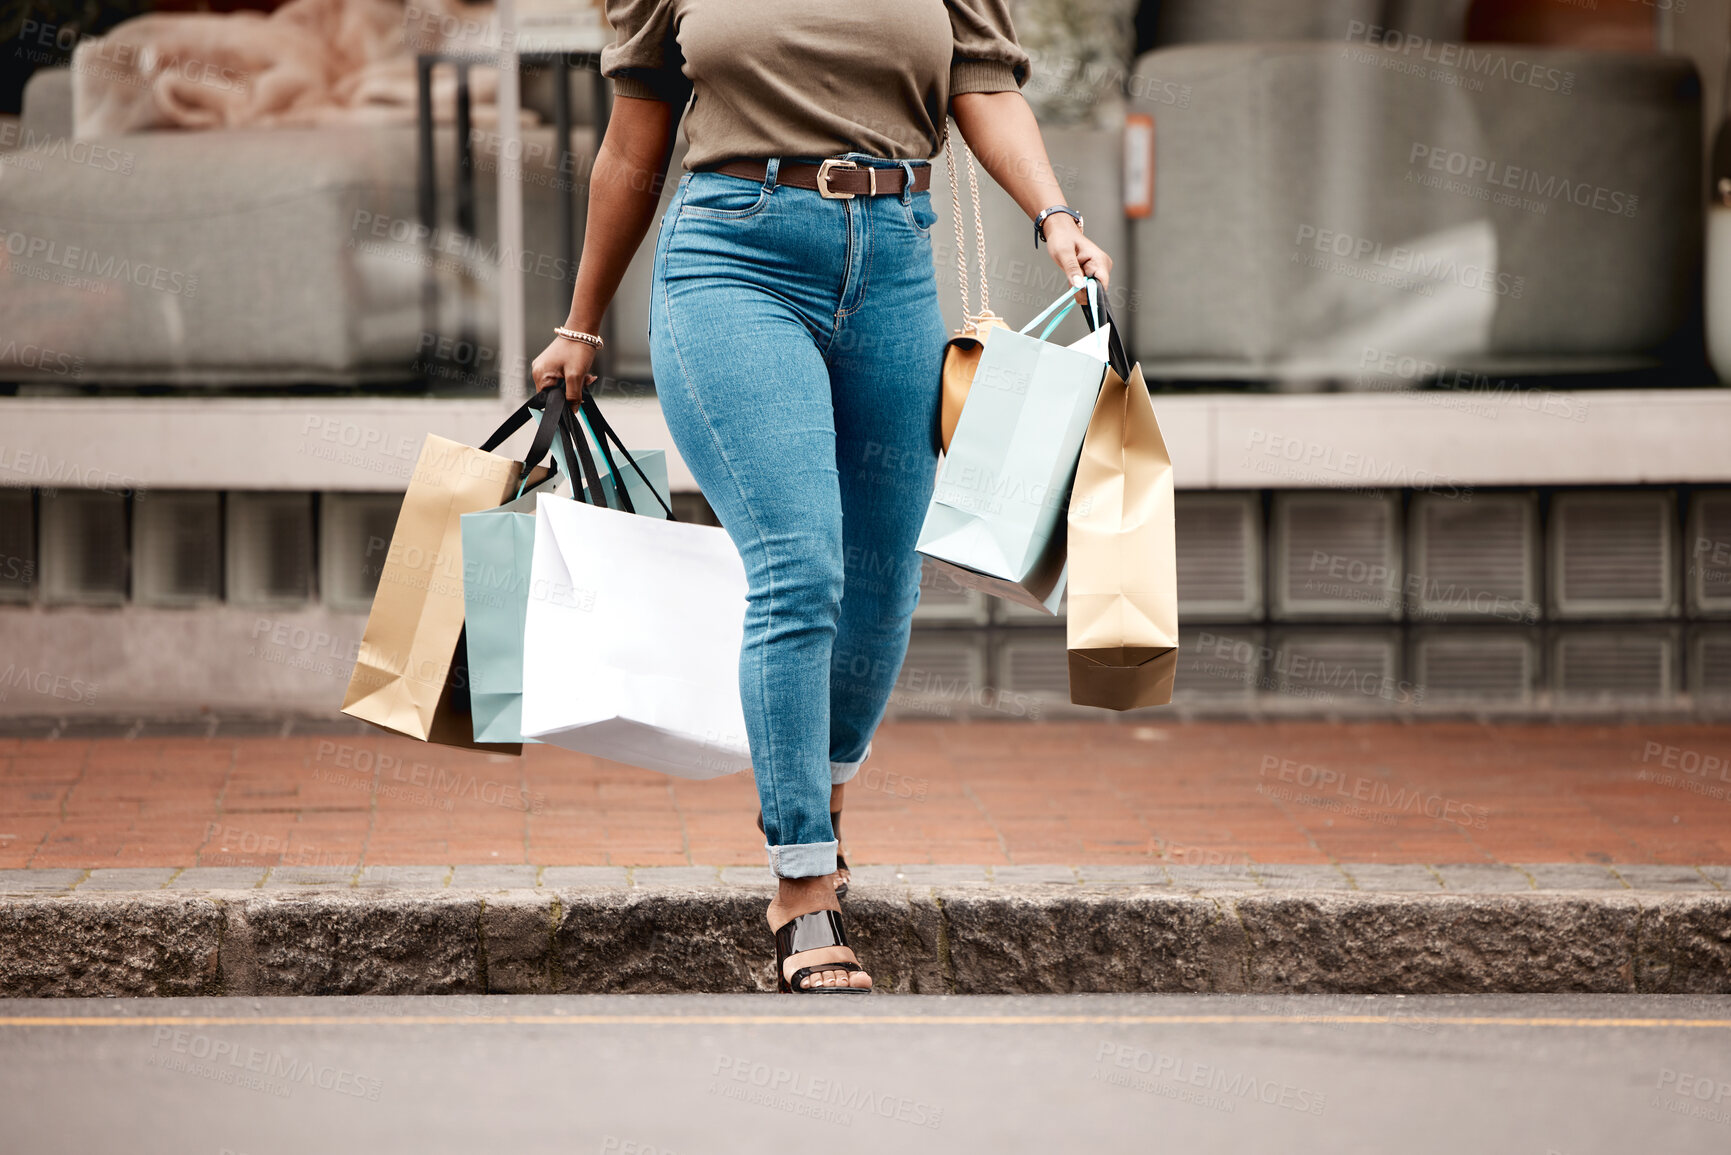 Buy stock photo Shot of an unrecognizable woman walking alone outside while shopping in the city